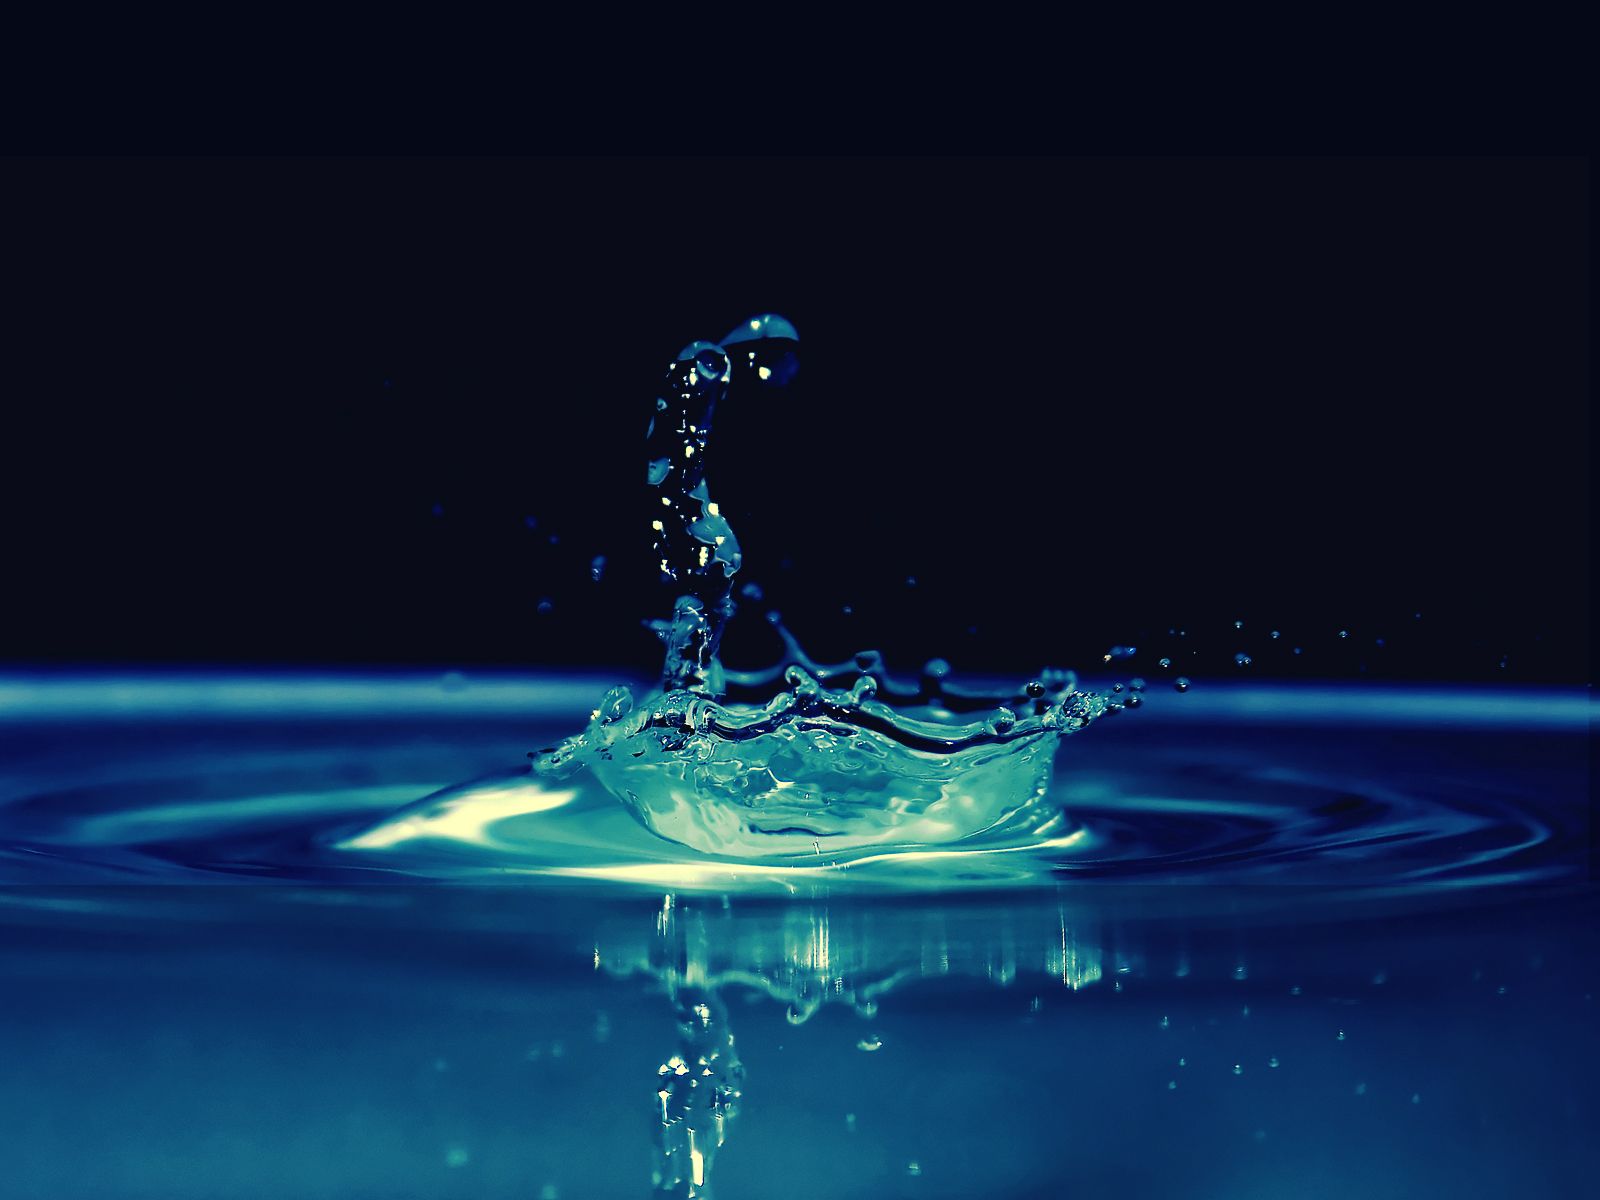 Water Live Wallpaper Android Phones Wallpaper High Quality